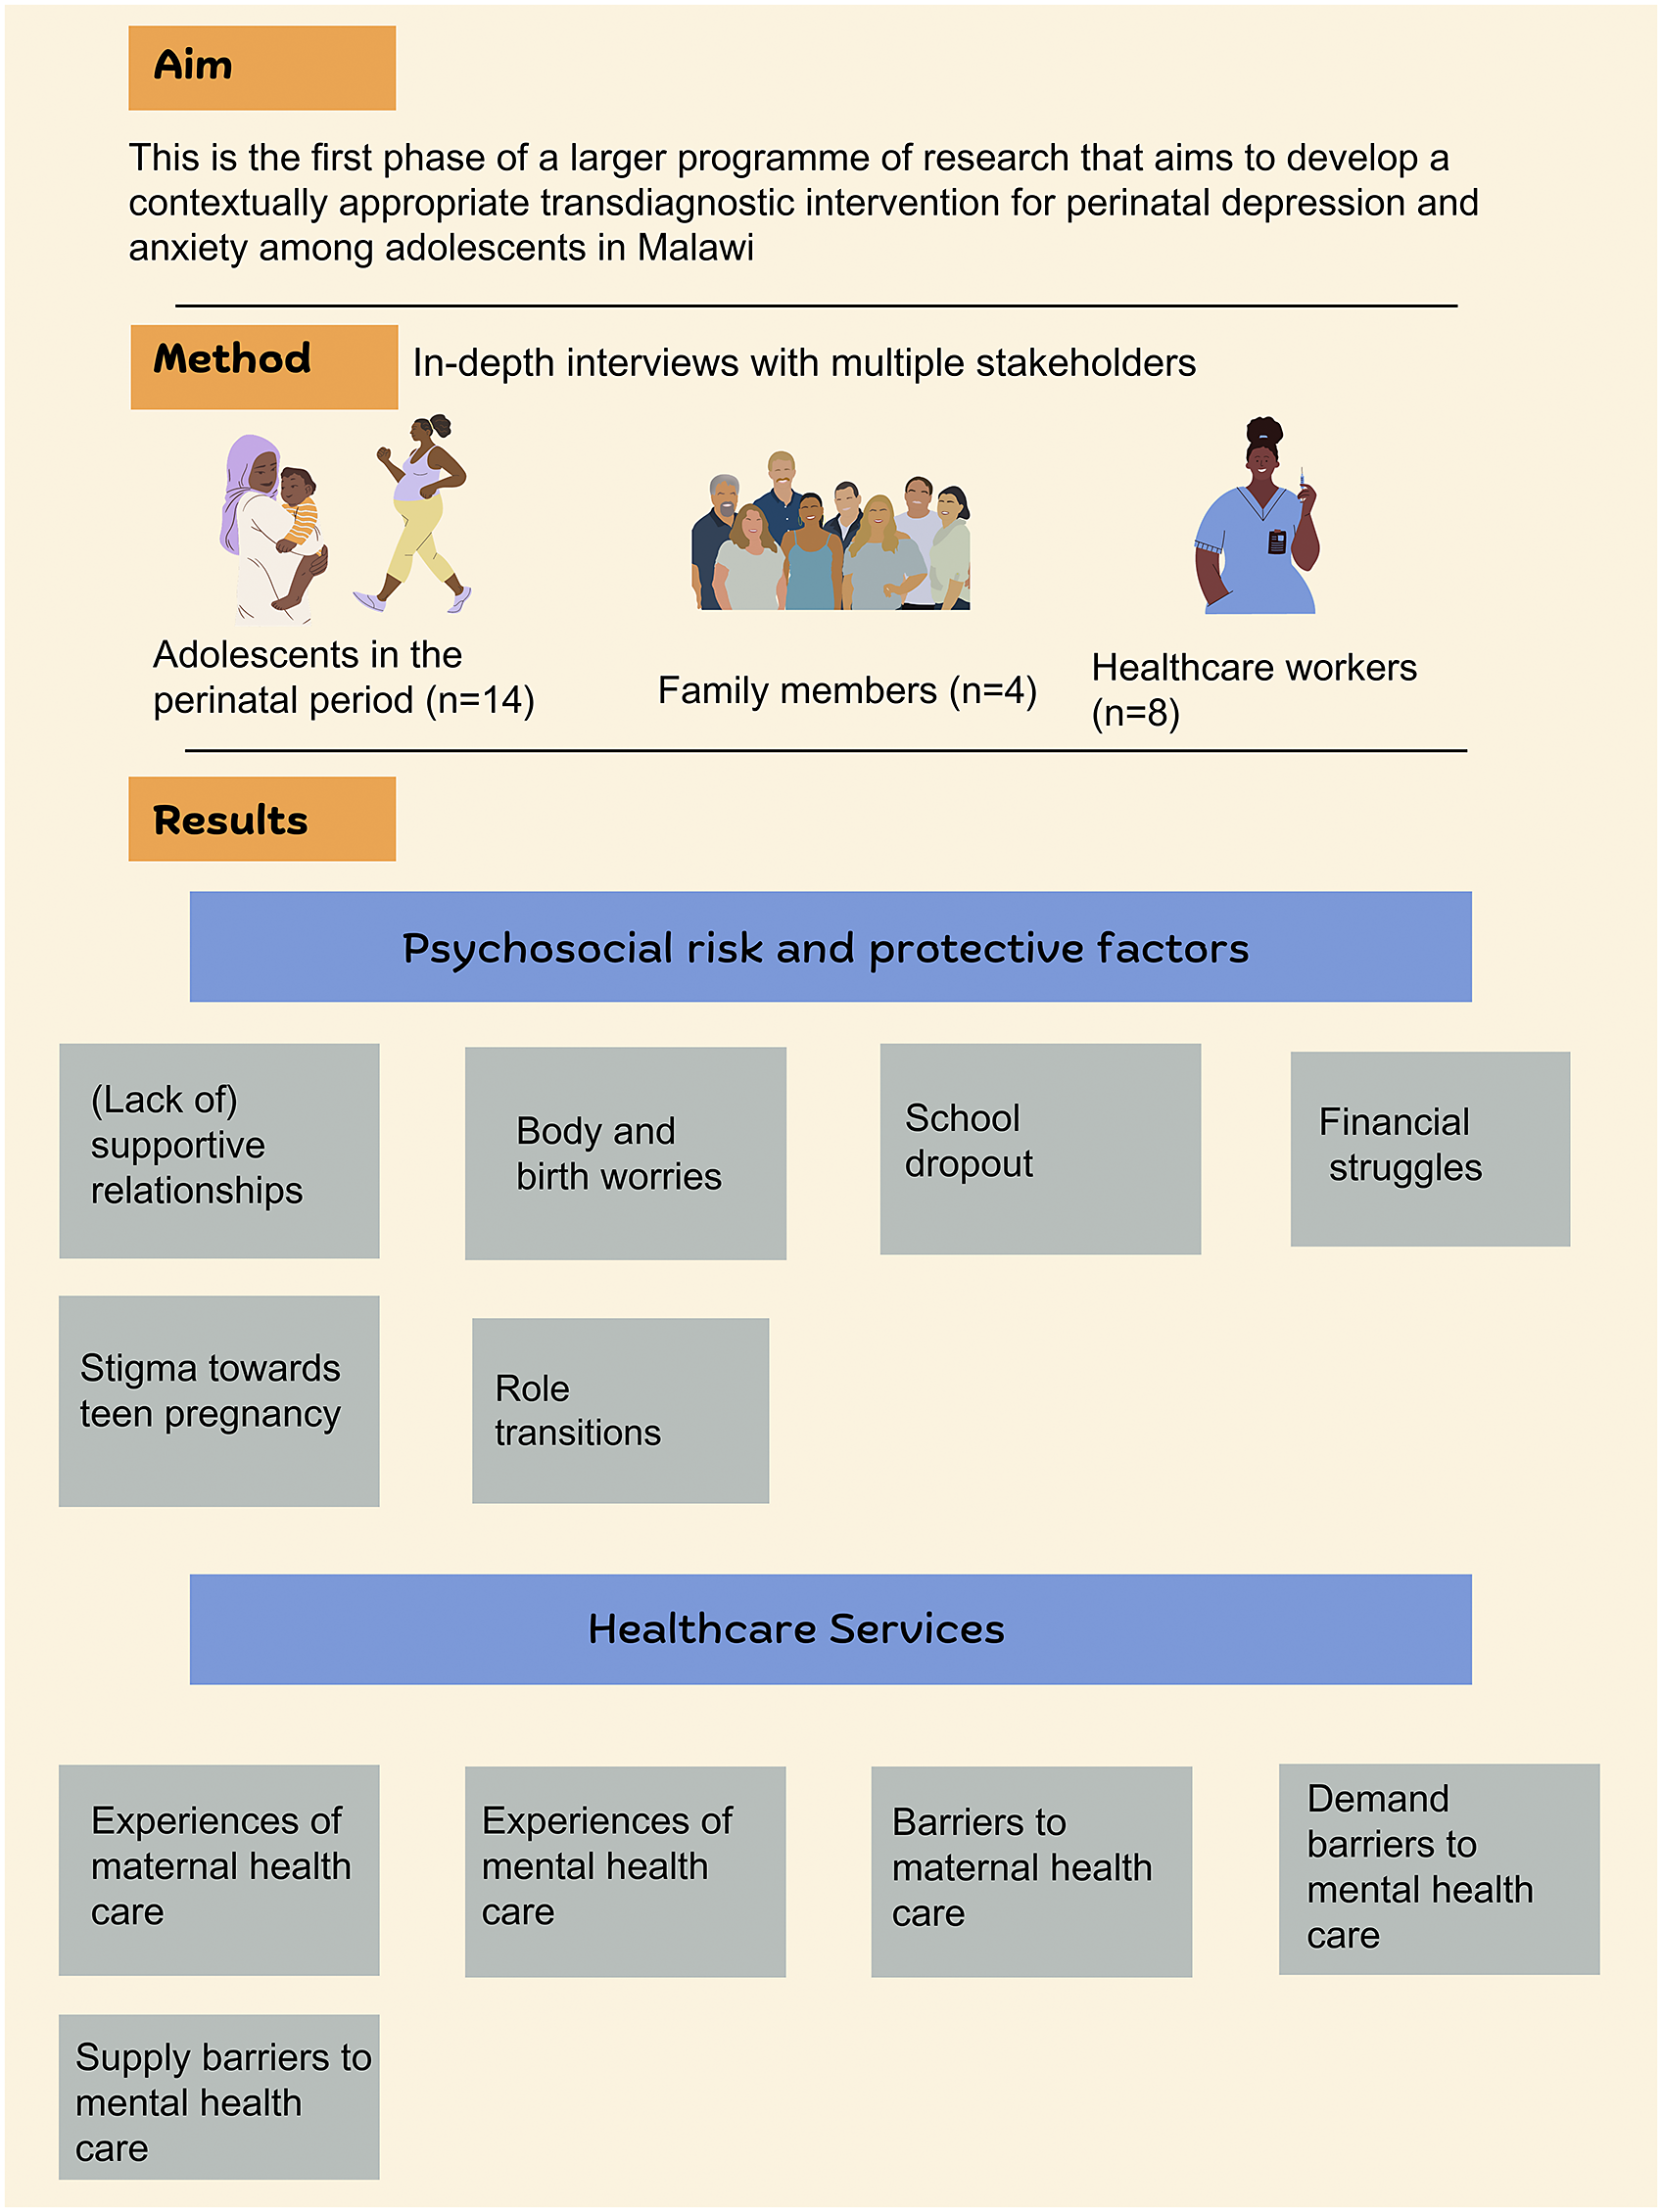 graphical abstract for “I felt I needed help, but I did not get any”: A multiple stakeholder qualitative study of risk and protective factors, and barriers to addressing common mental health problems among perinatal adolescents in Malawi - open in full screen